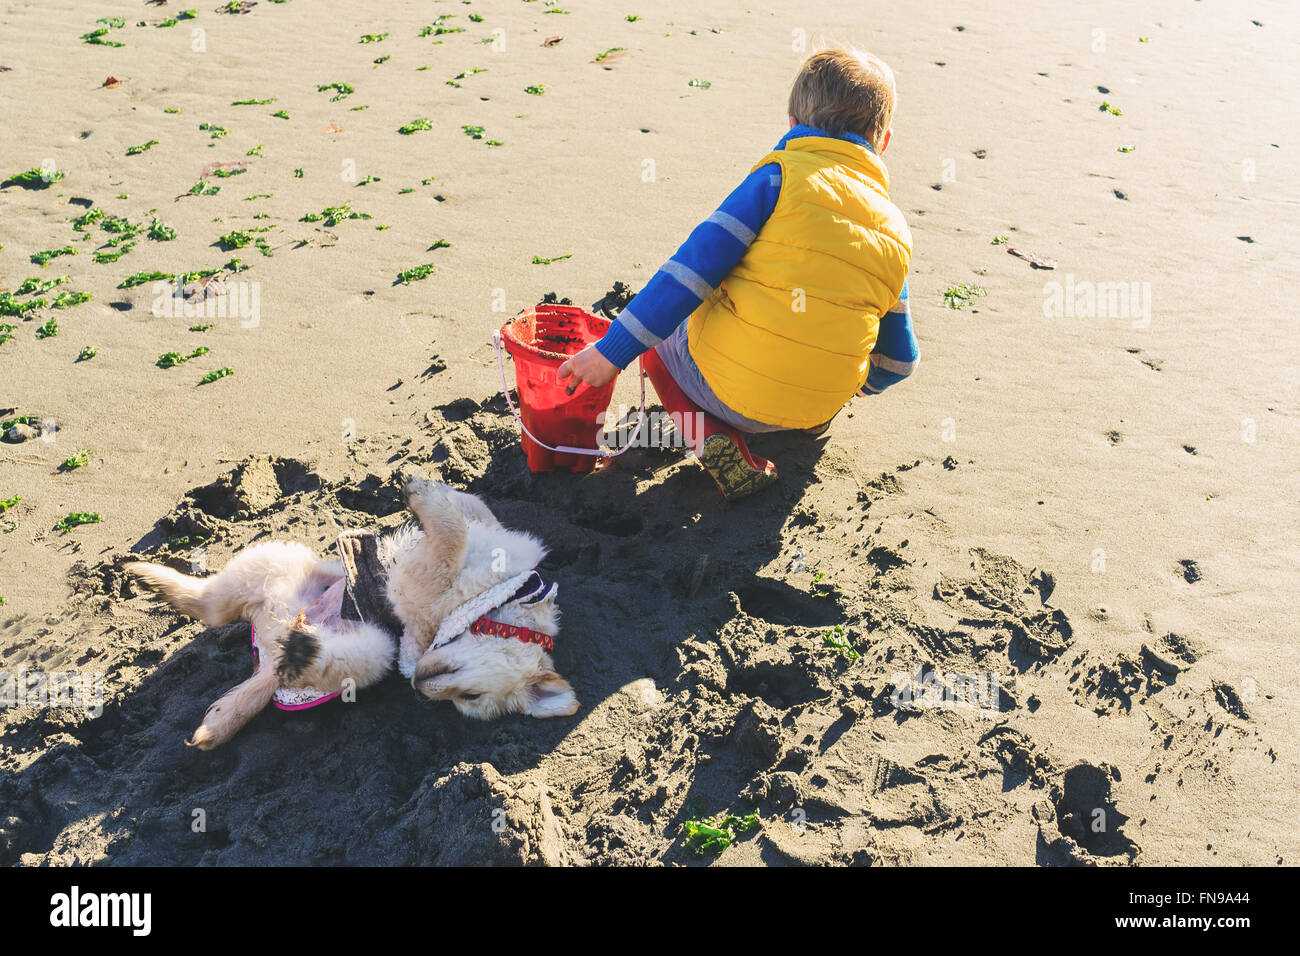 Boy digging on beach with dog rolling in the sand Stock Photo